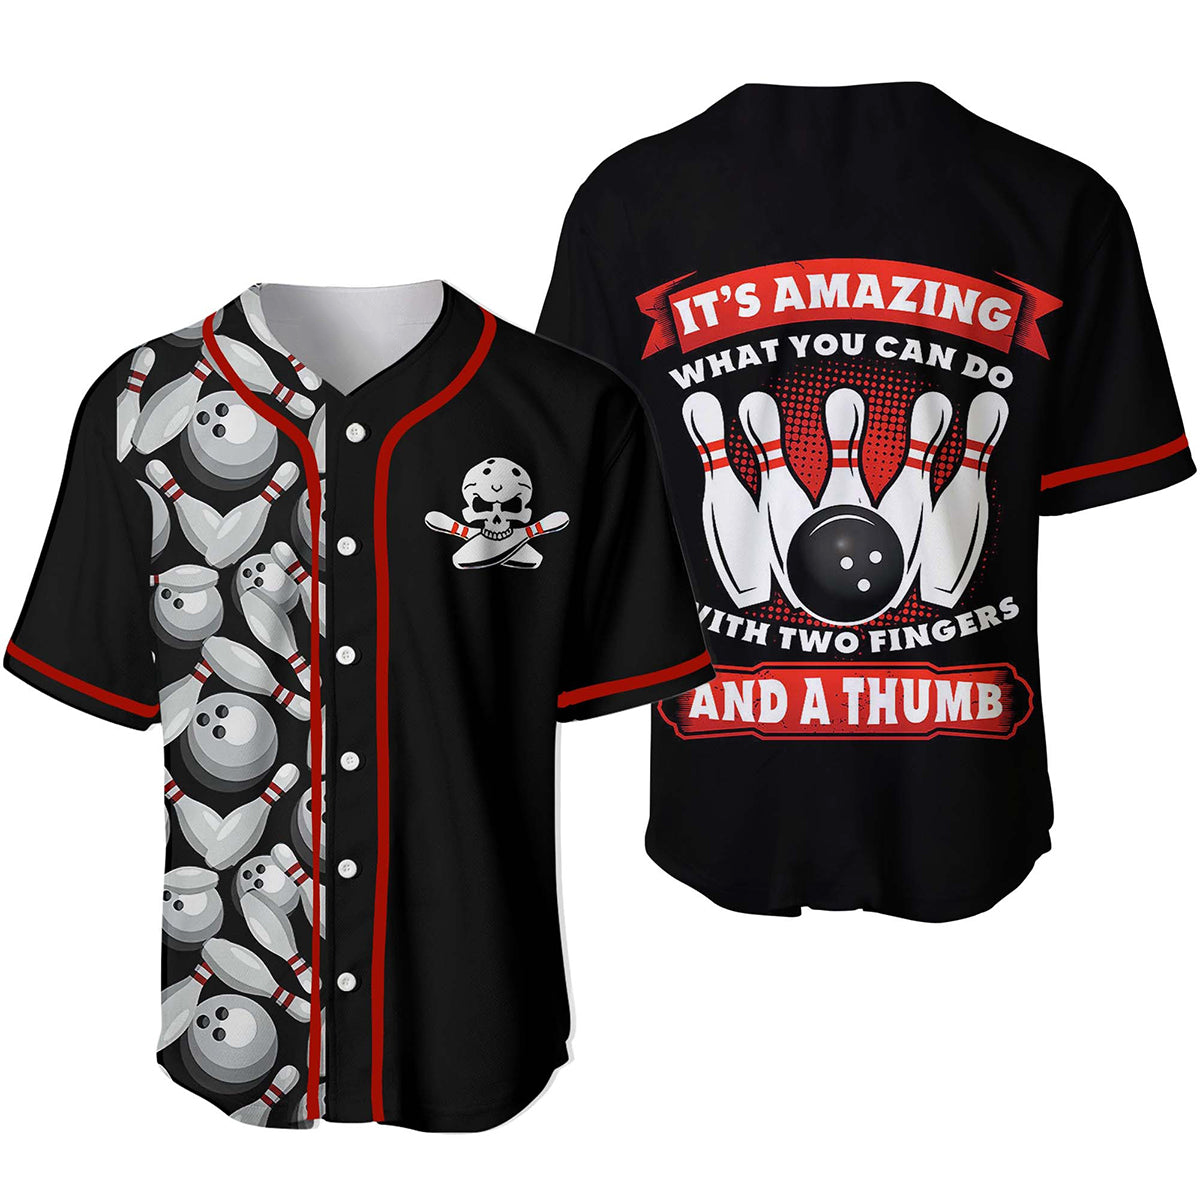 Bowling Baseball Jersey/ Bowling It’s Amazing What You Can Do With Two Fingers Baseball Jerseys For Men And Women - Perfect Gift For Bowling Lovers/ Bowlers